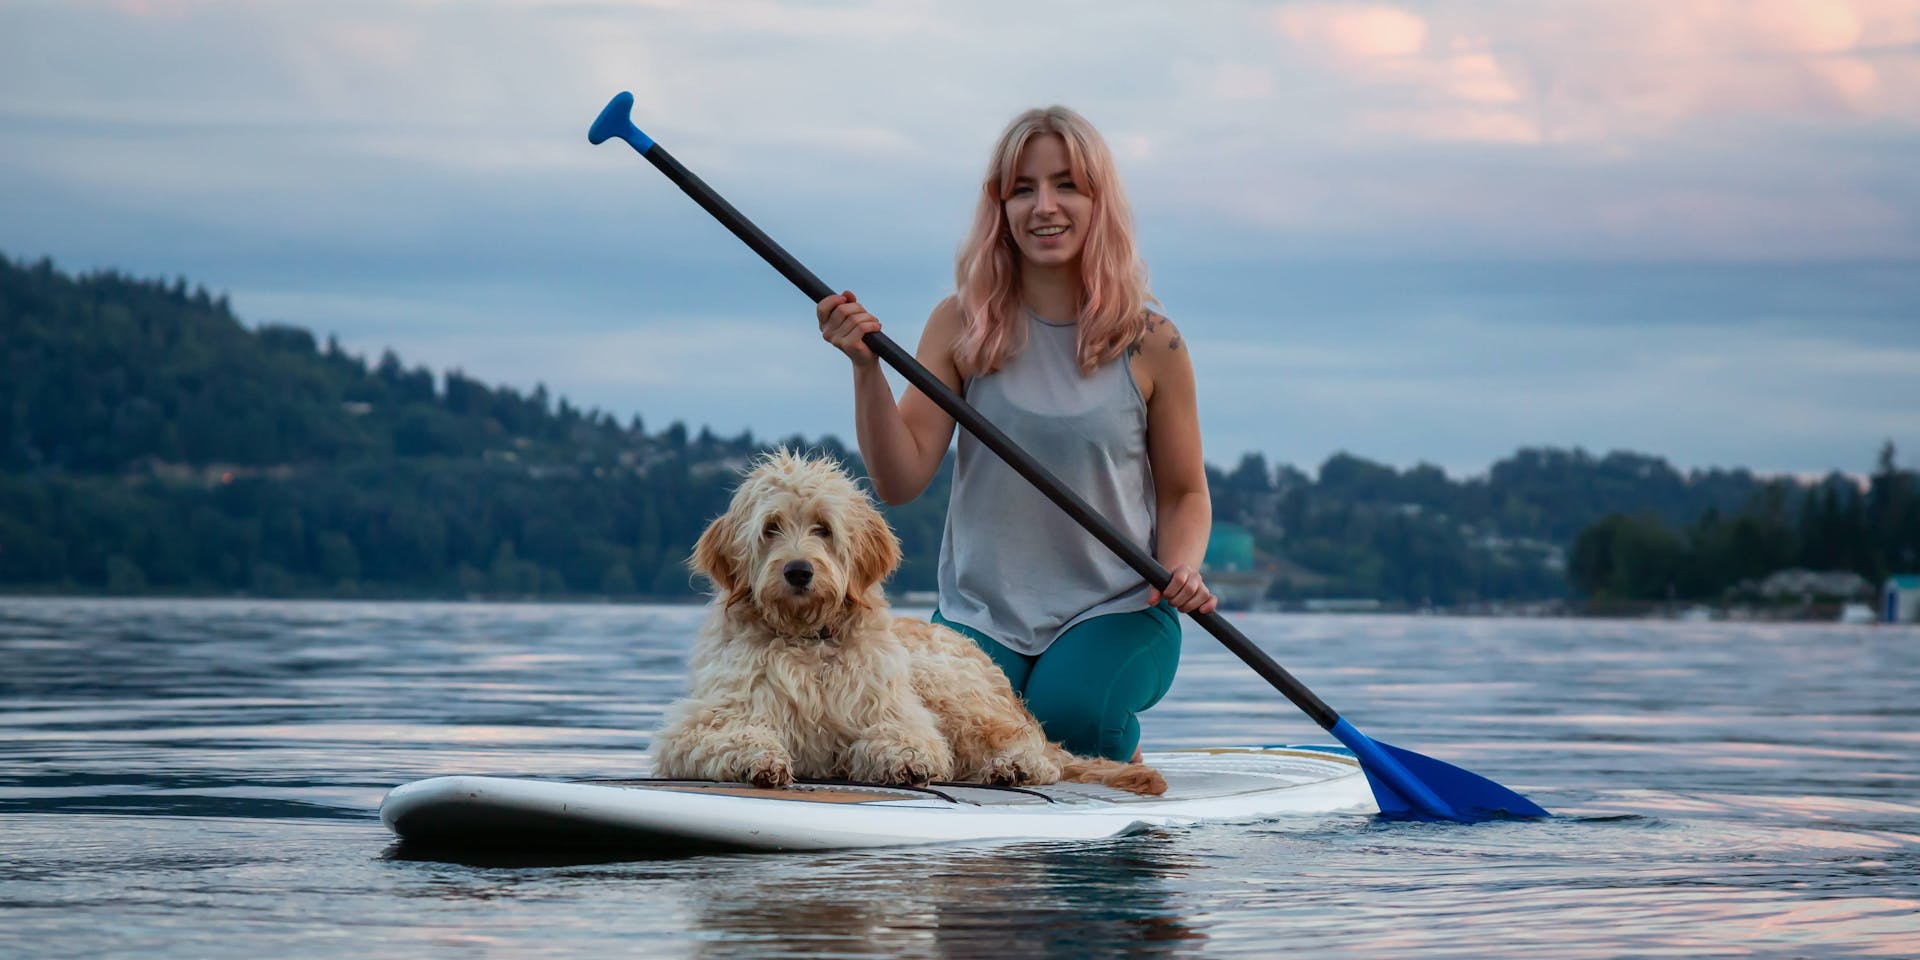 Dog and owner on a paddle-board on a lake.